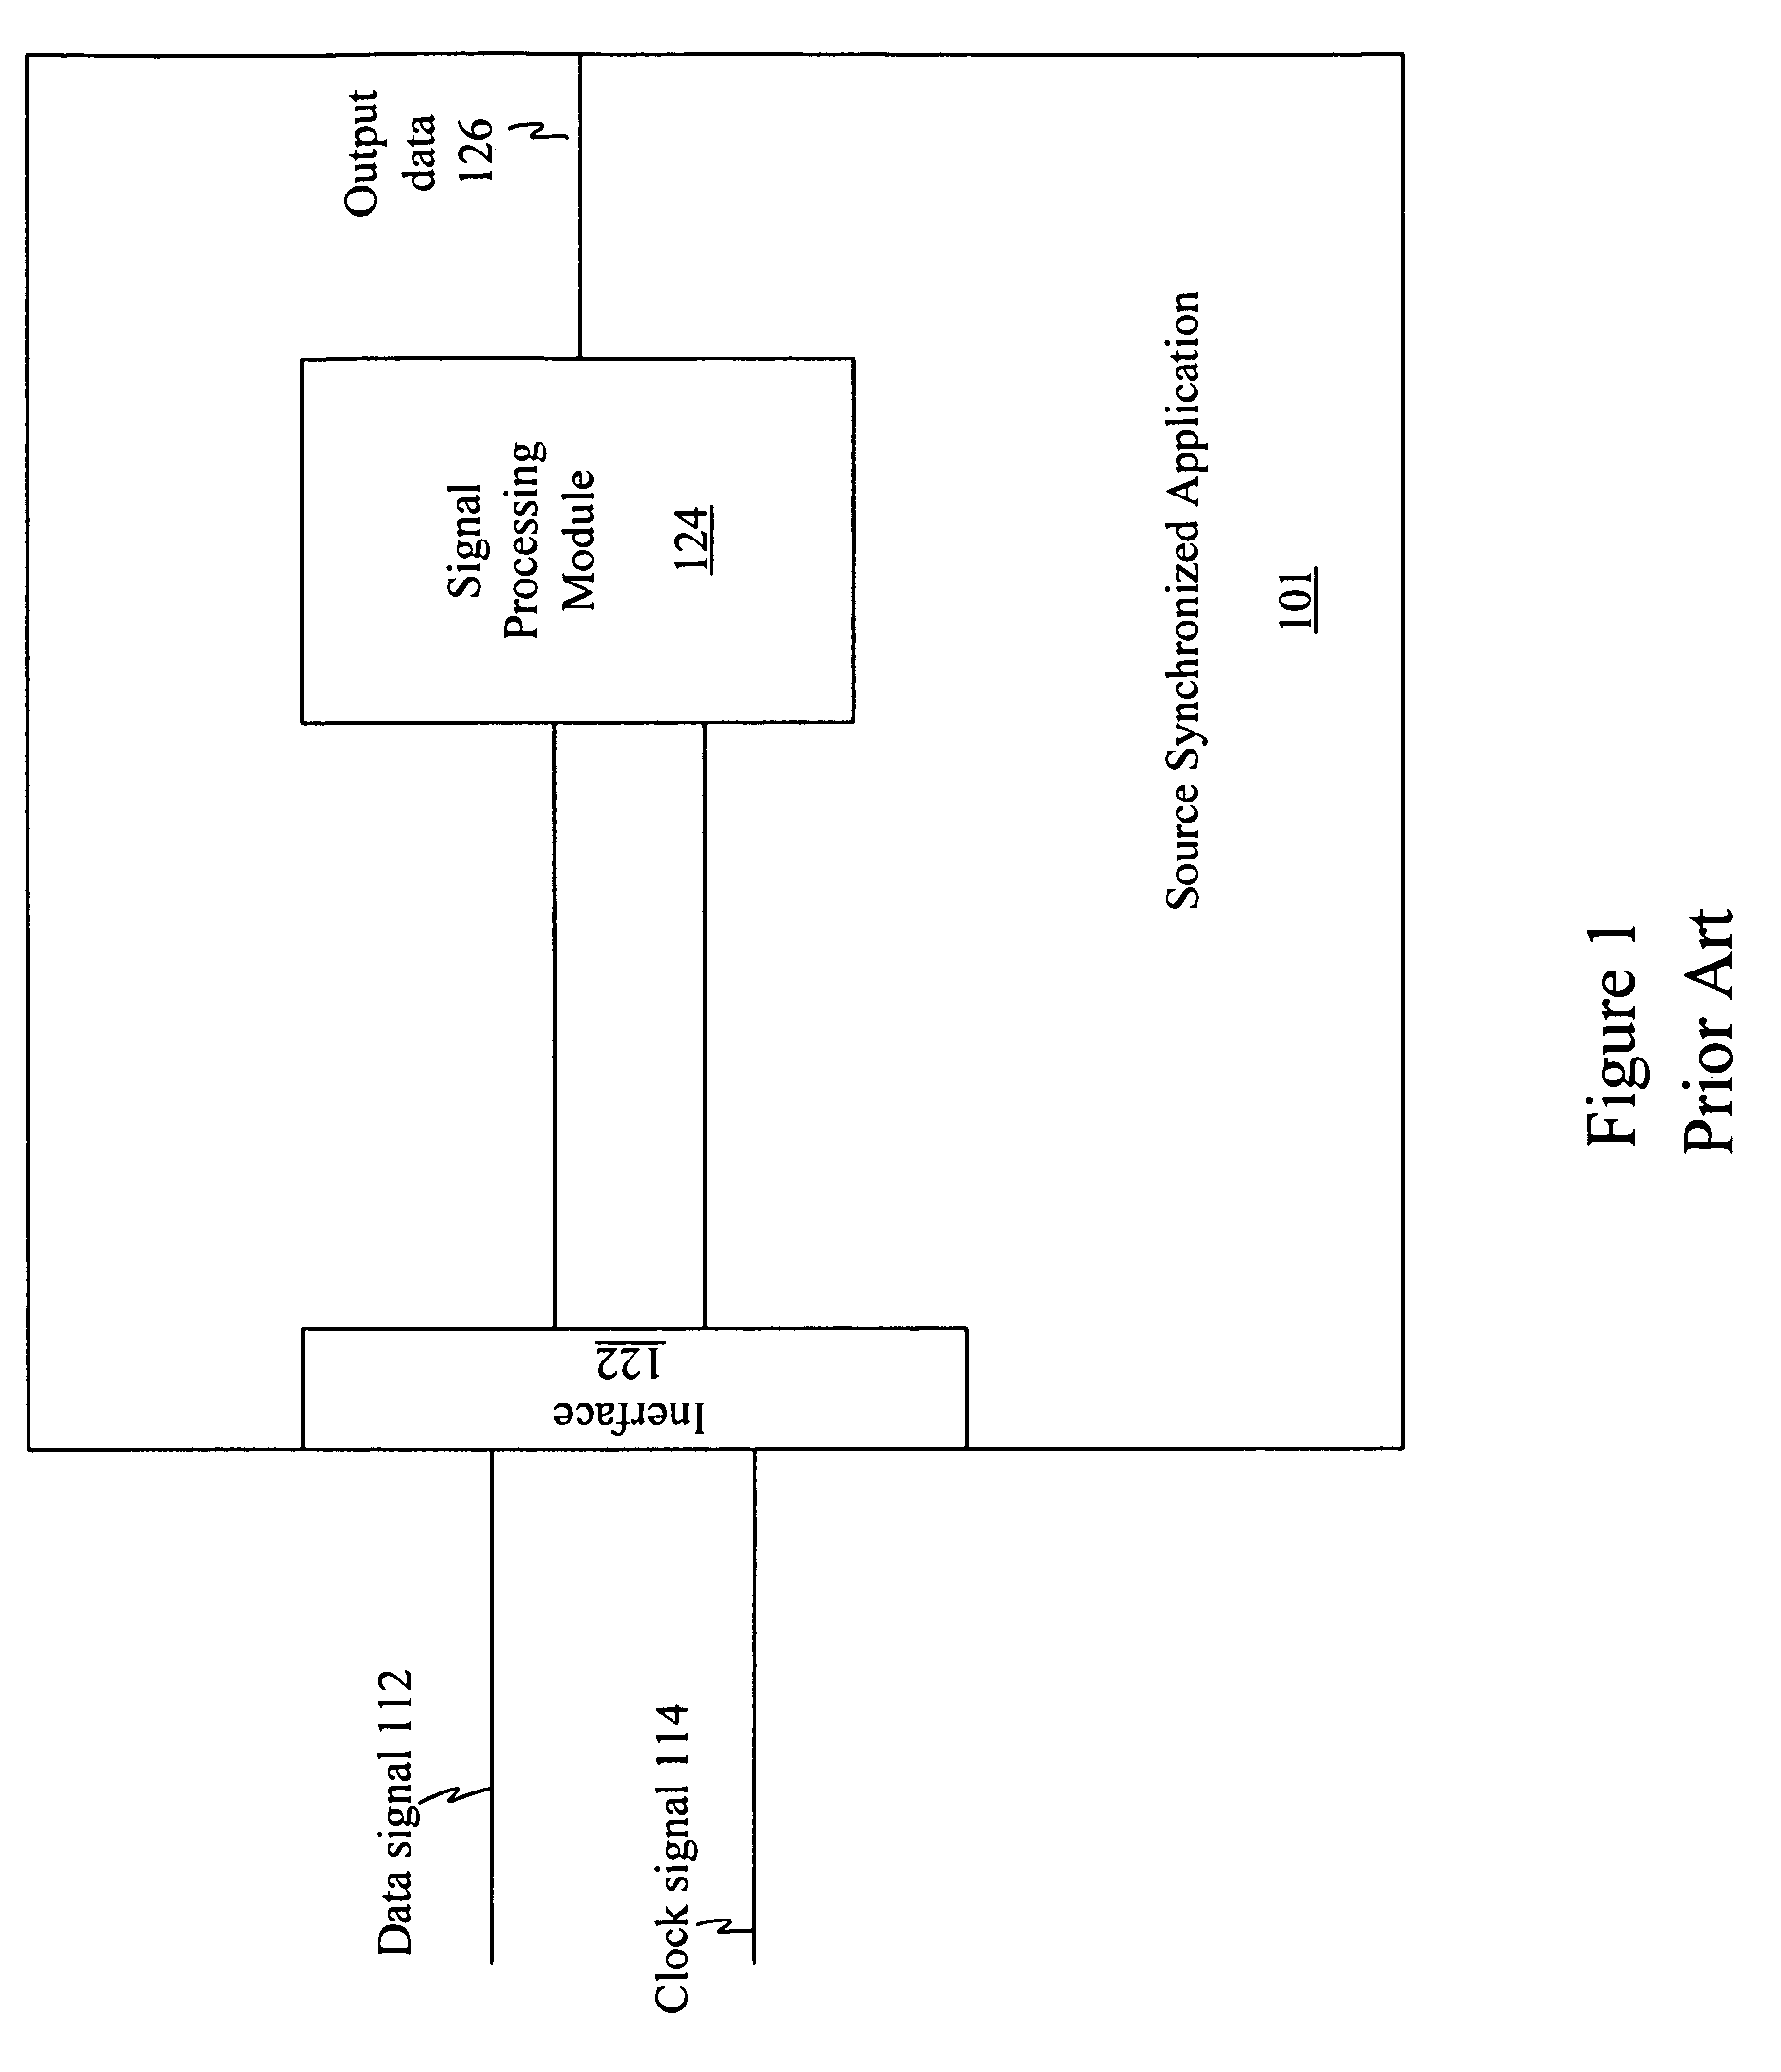 Low-power, programmable multi-stage delay cell